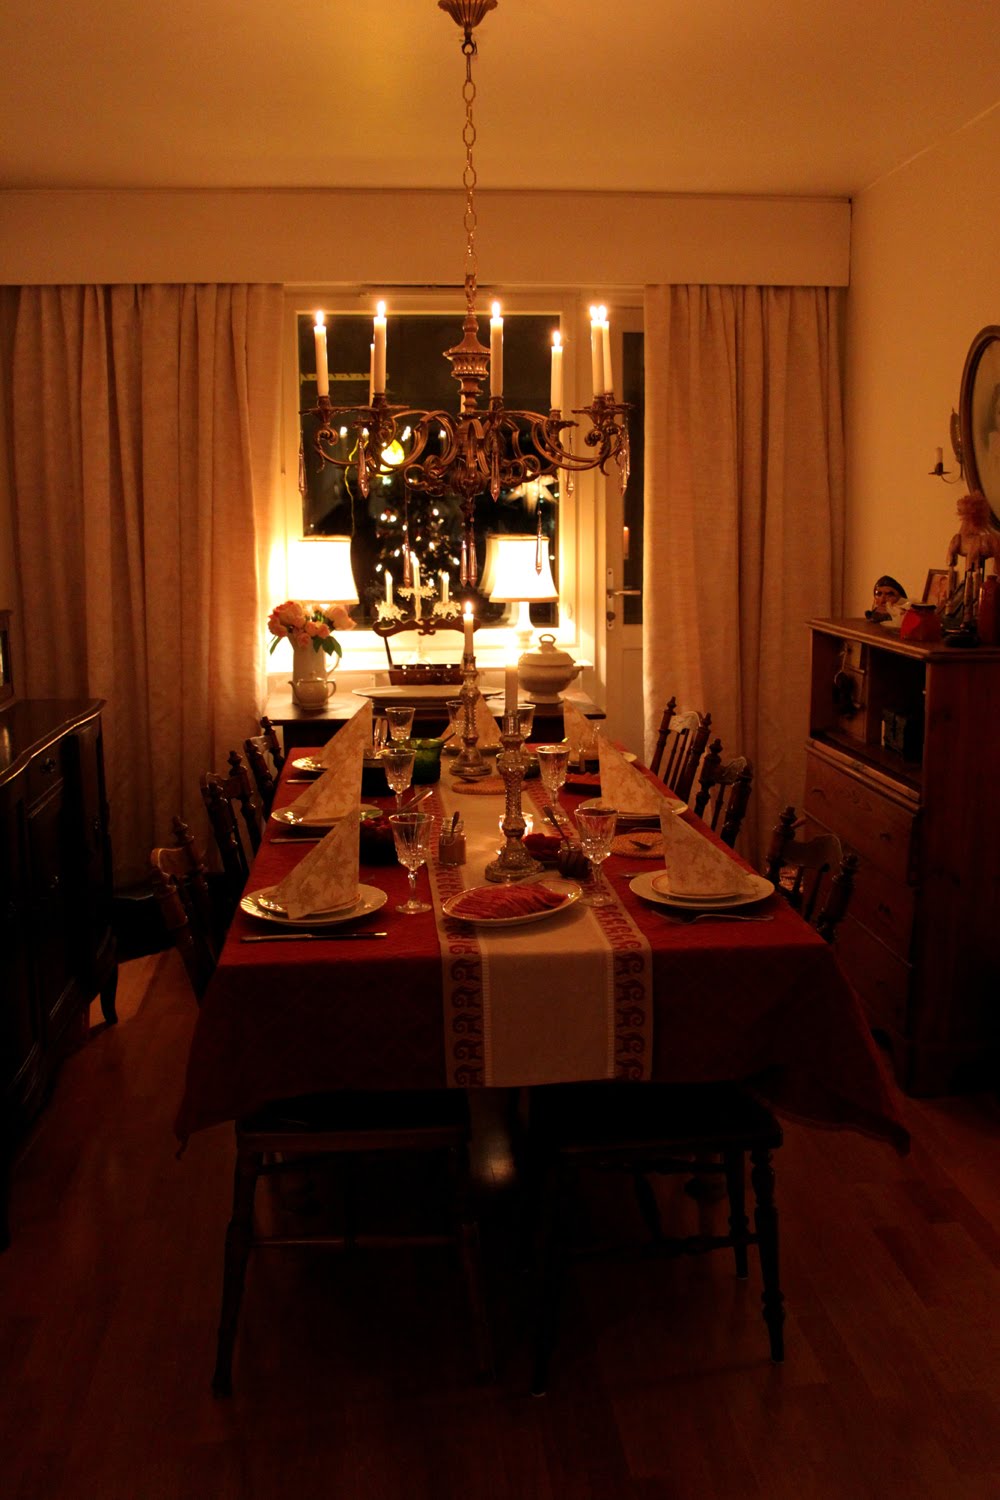 Cristmas in the Diningroom